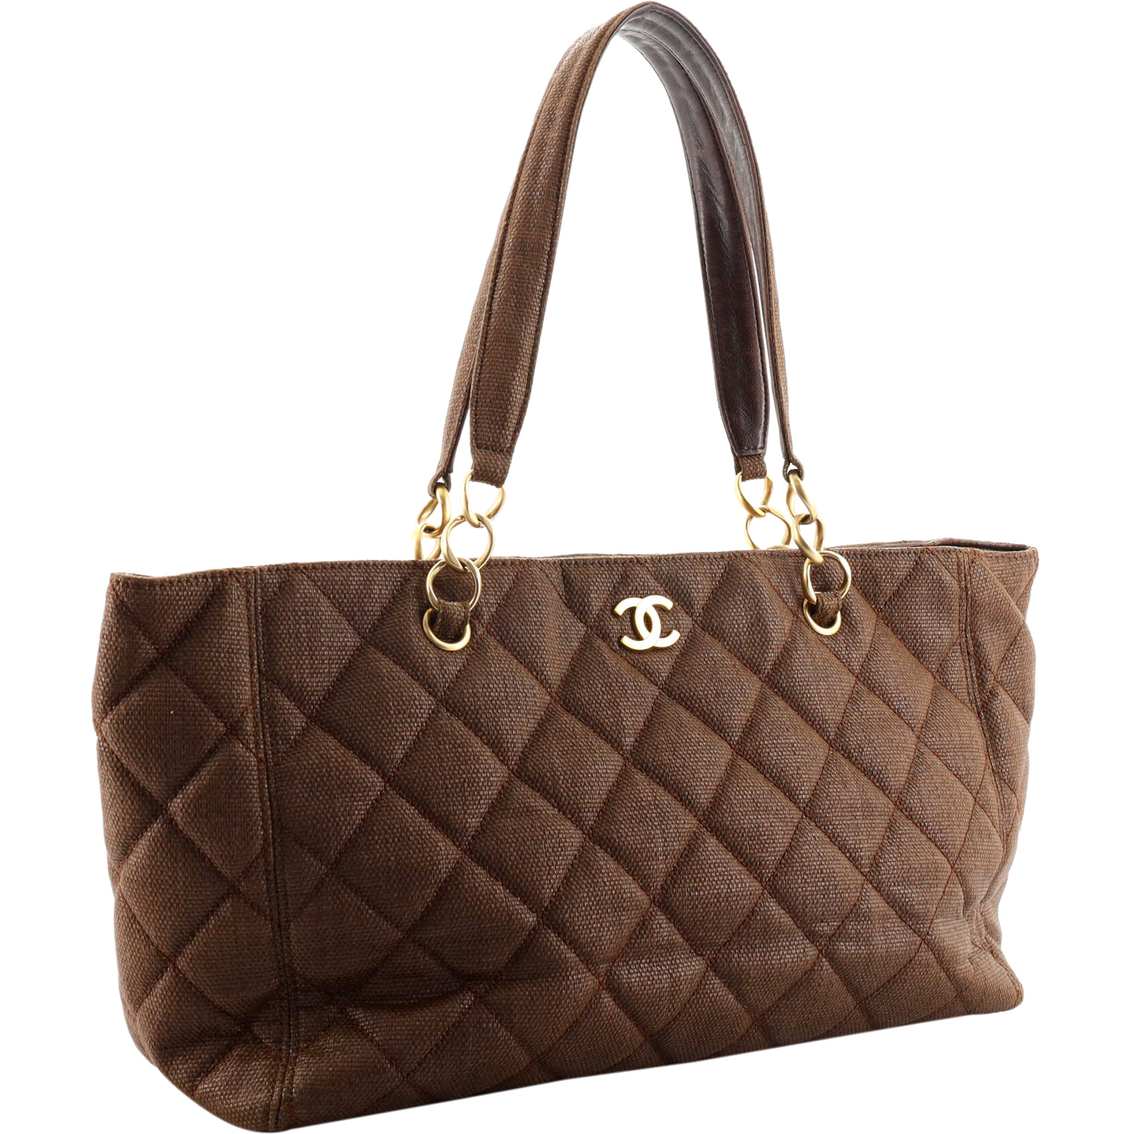 CHANEL Vintage Stitched CC Large Tote Brown Suede Gold